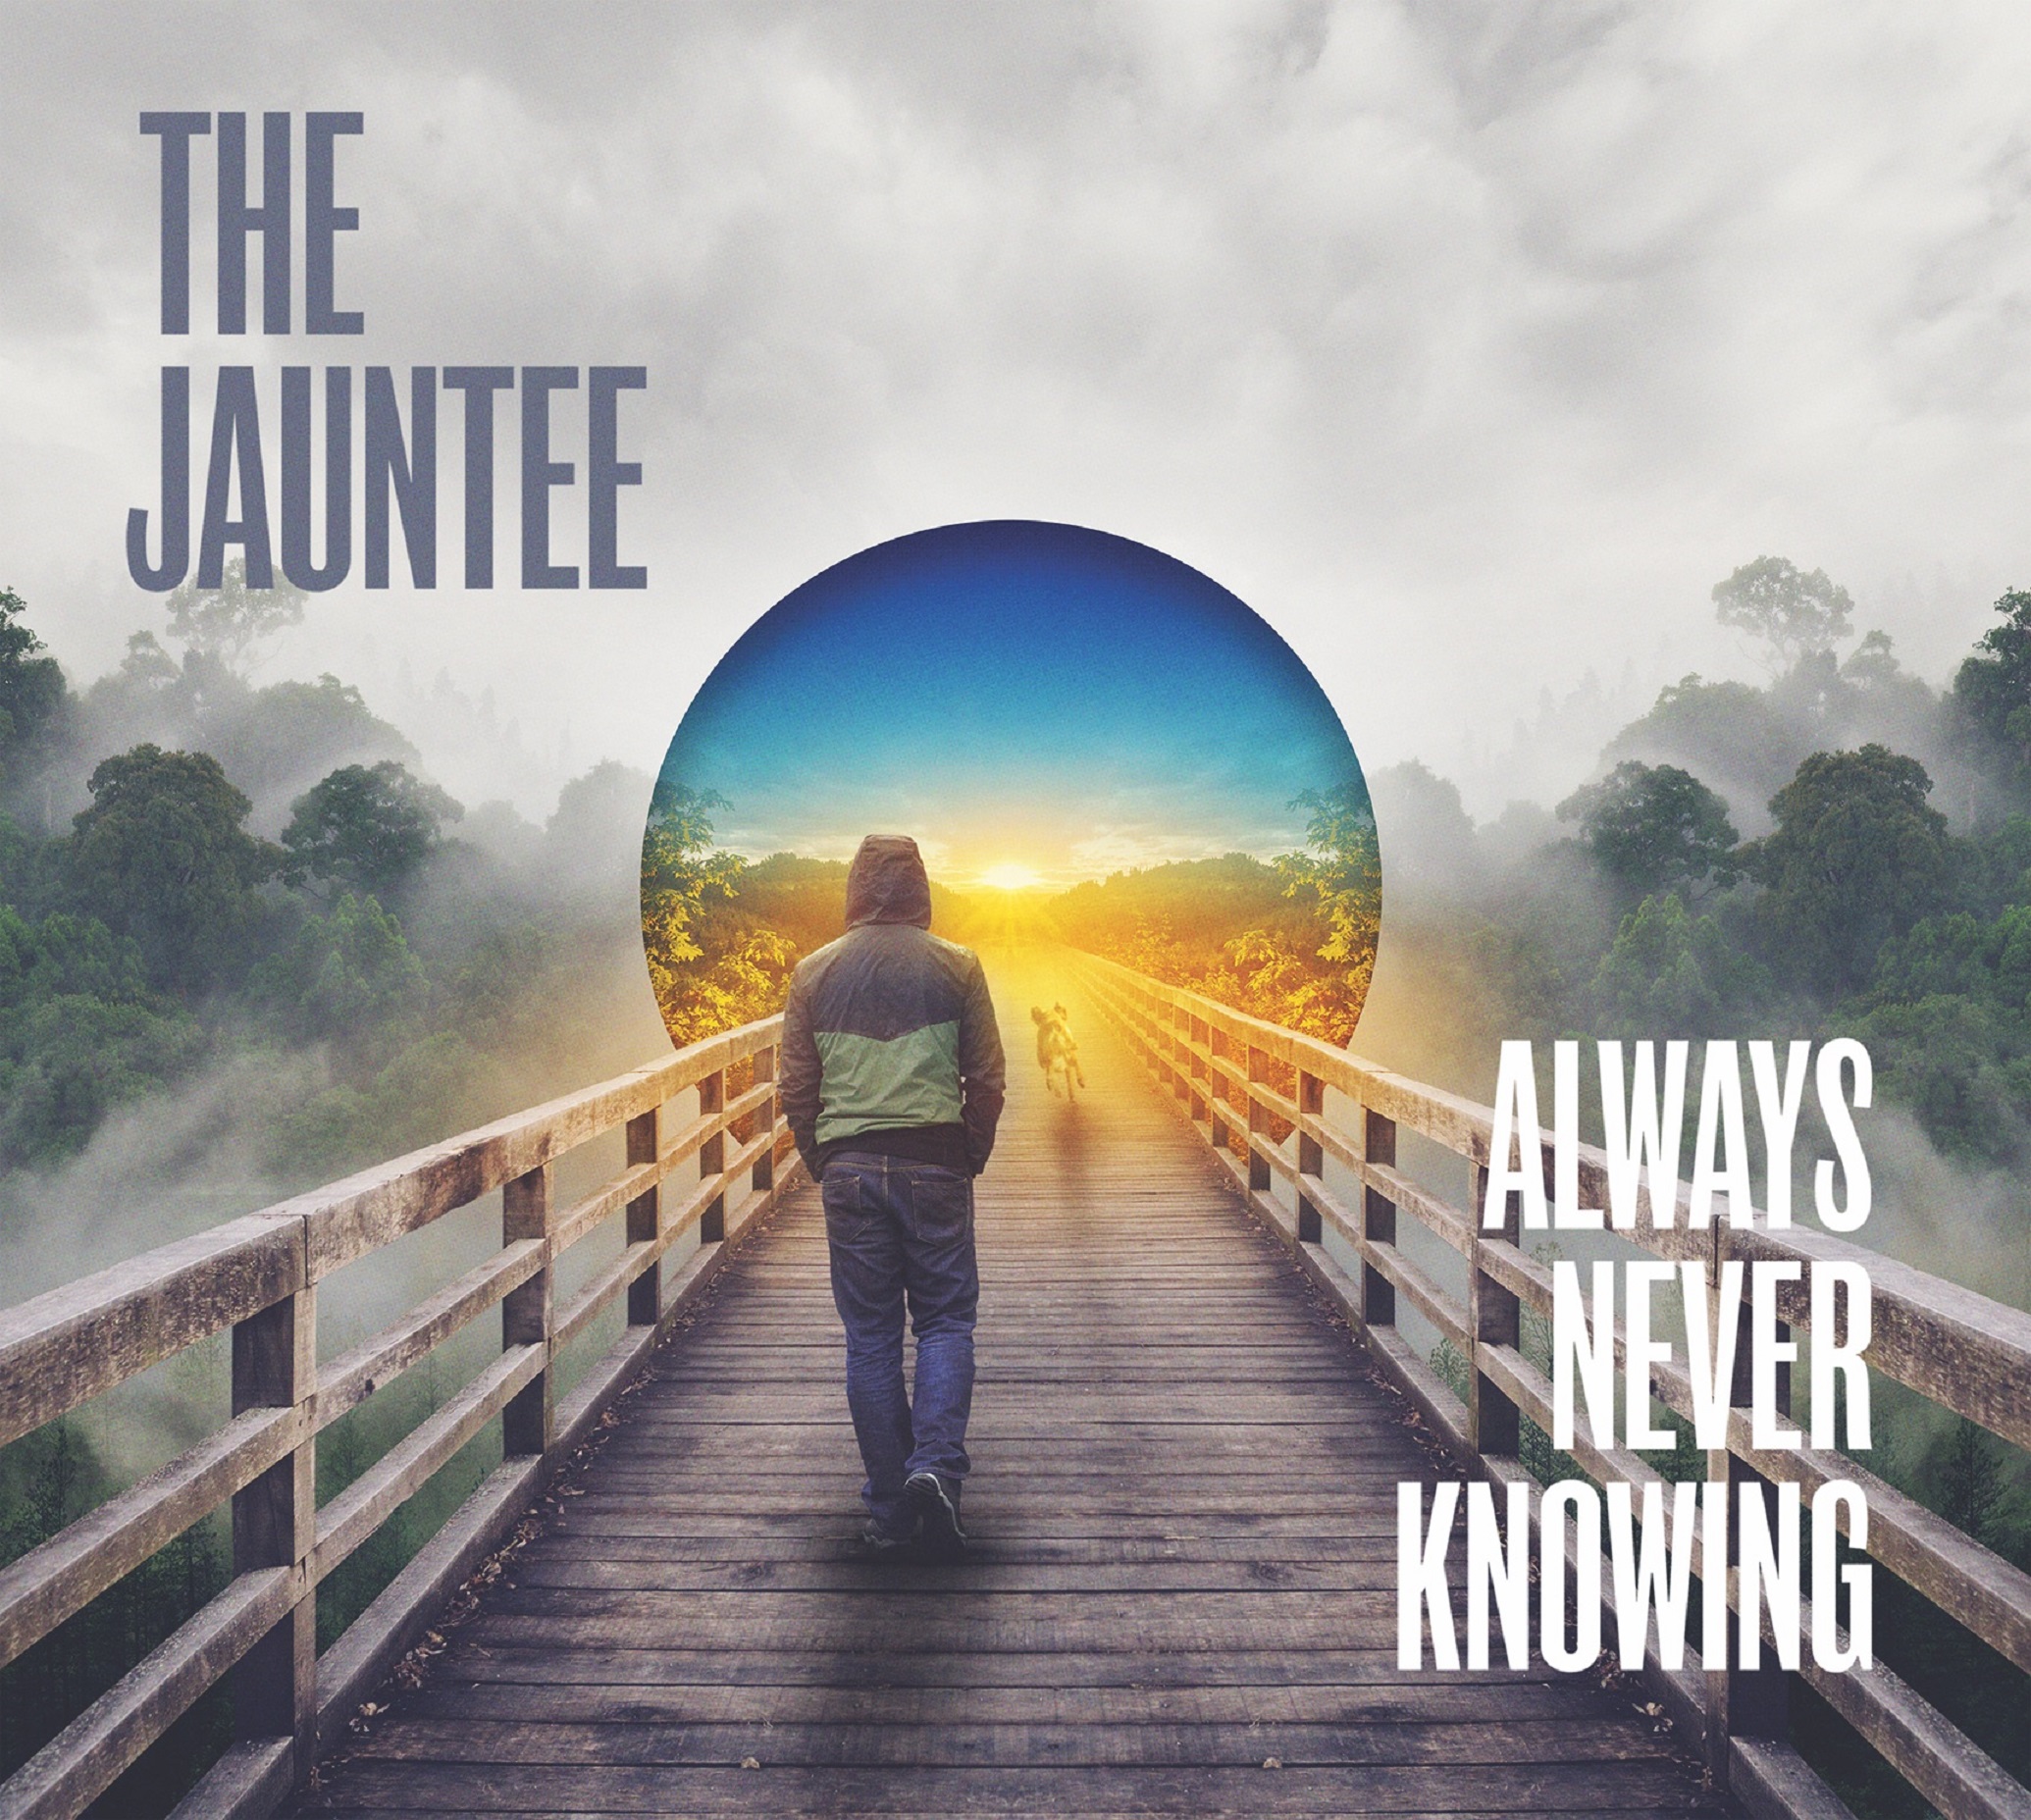 The Jauntee Announce New Album, Always Never Knowing